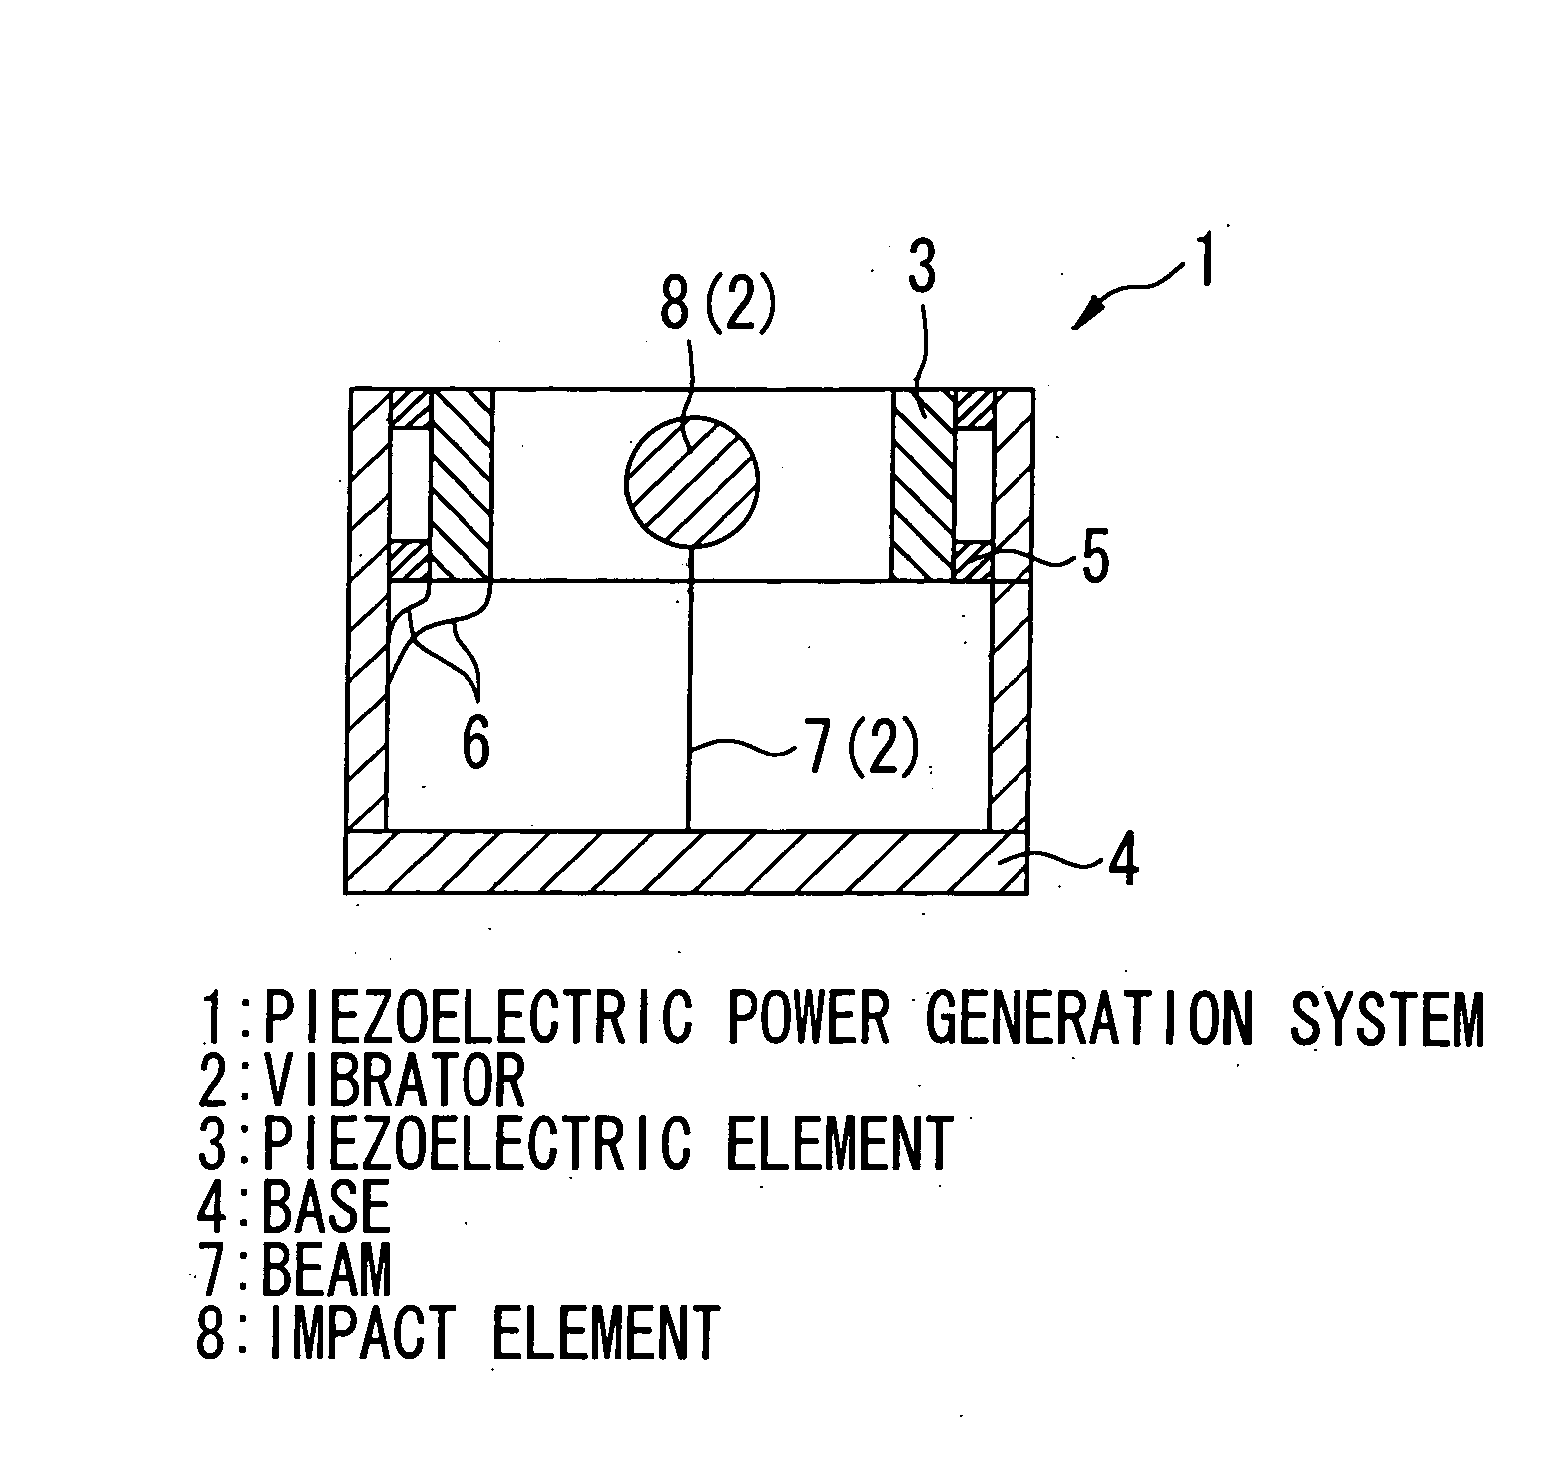 Piezoelectric power generation system and sensor system